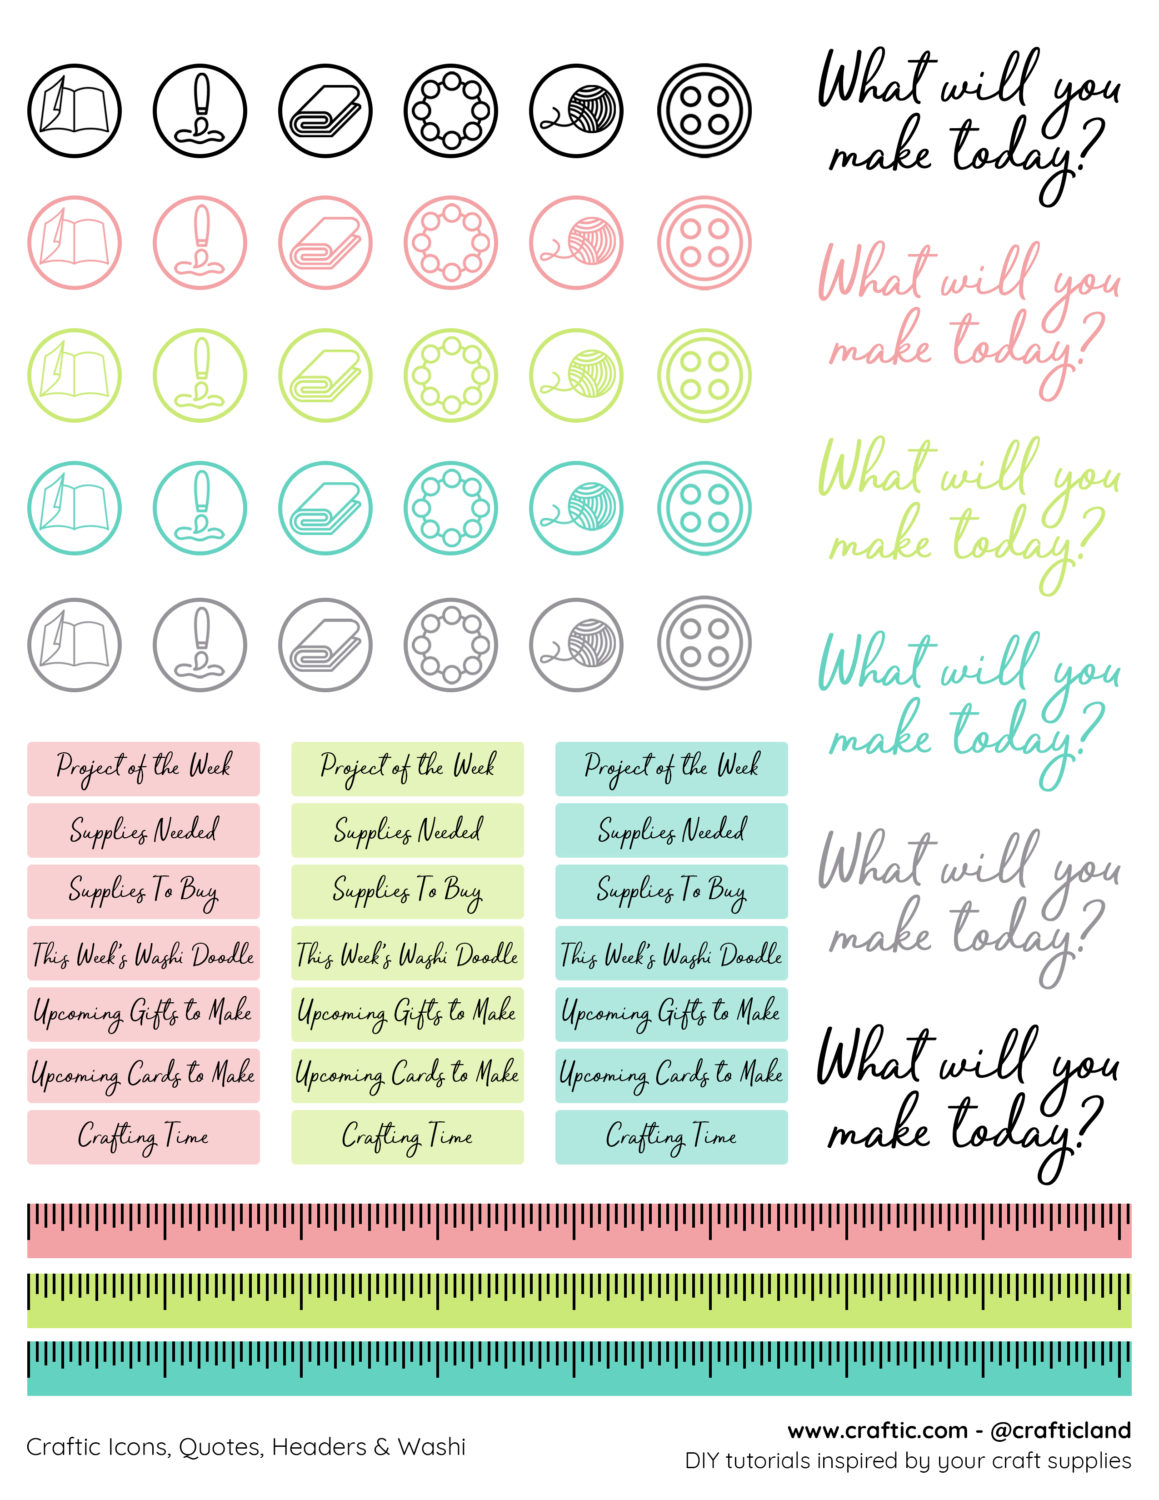 http://blog.tombowusa.com/wp-content/uploads/files/stickers-icons-quotes-headers-washi-set-1159x1500.jpg